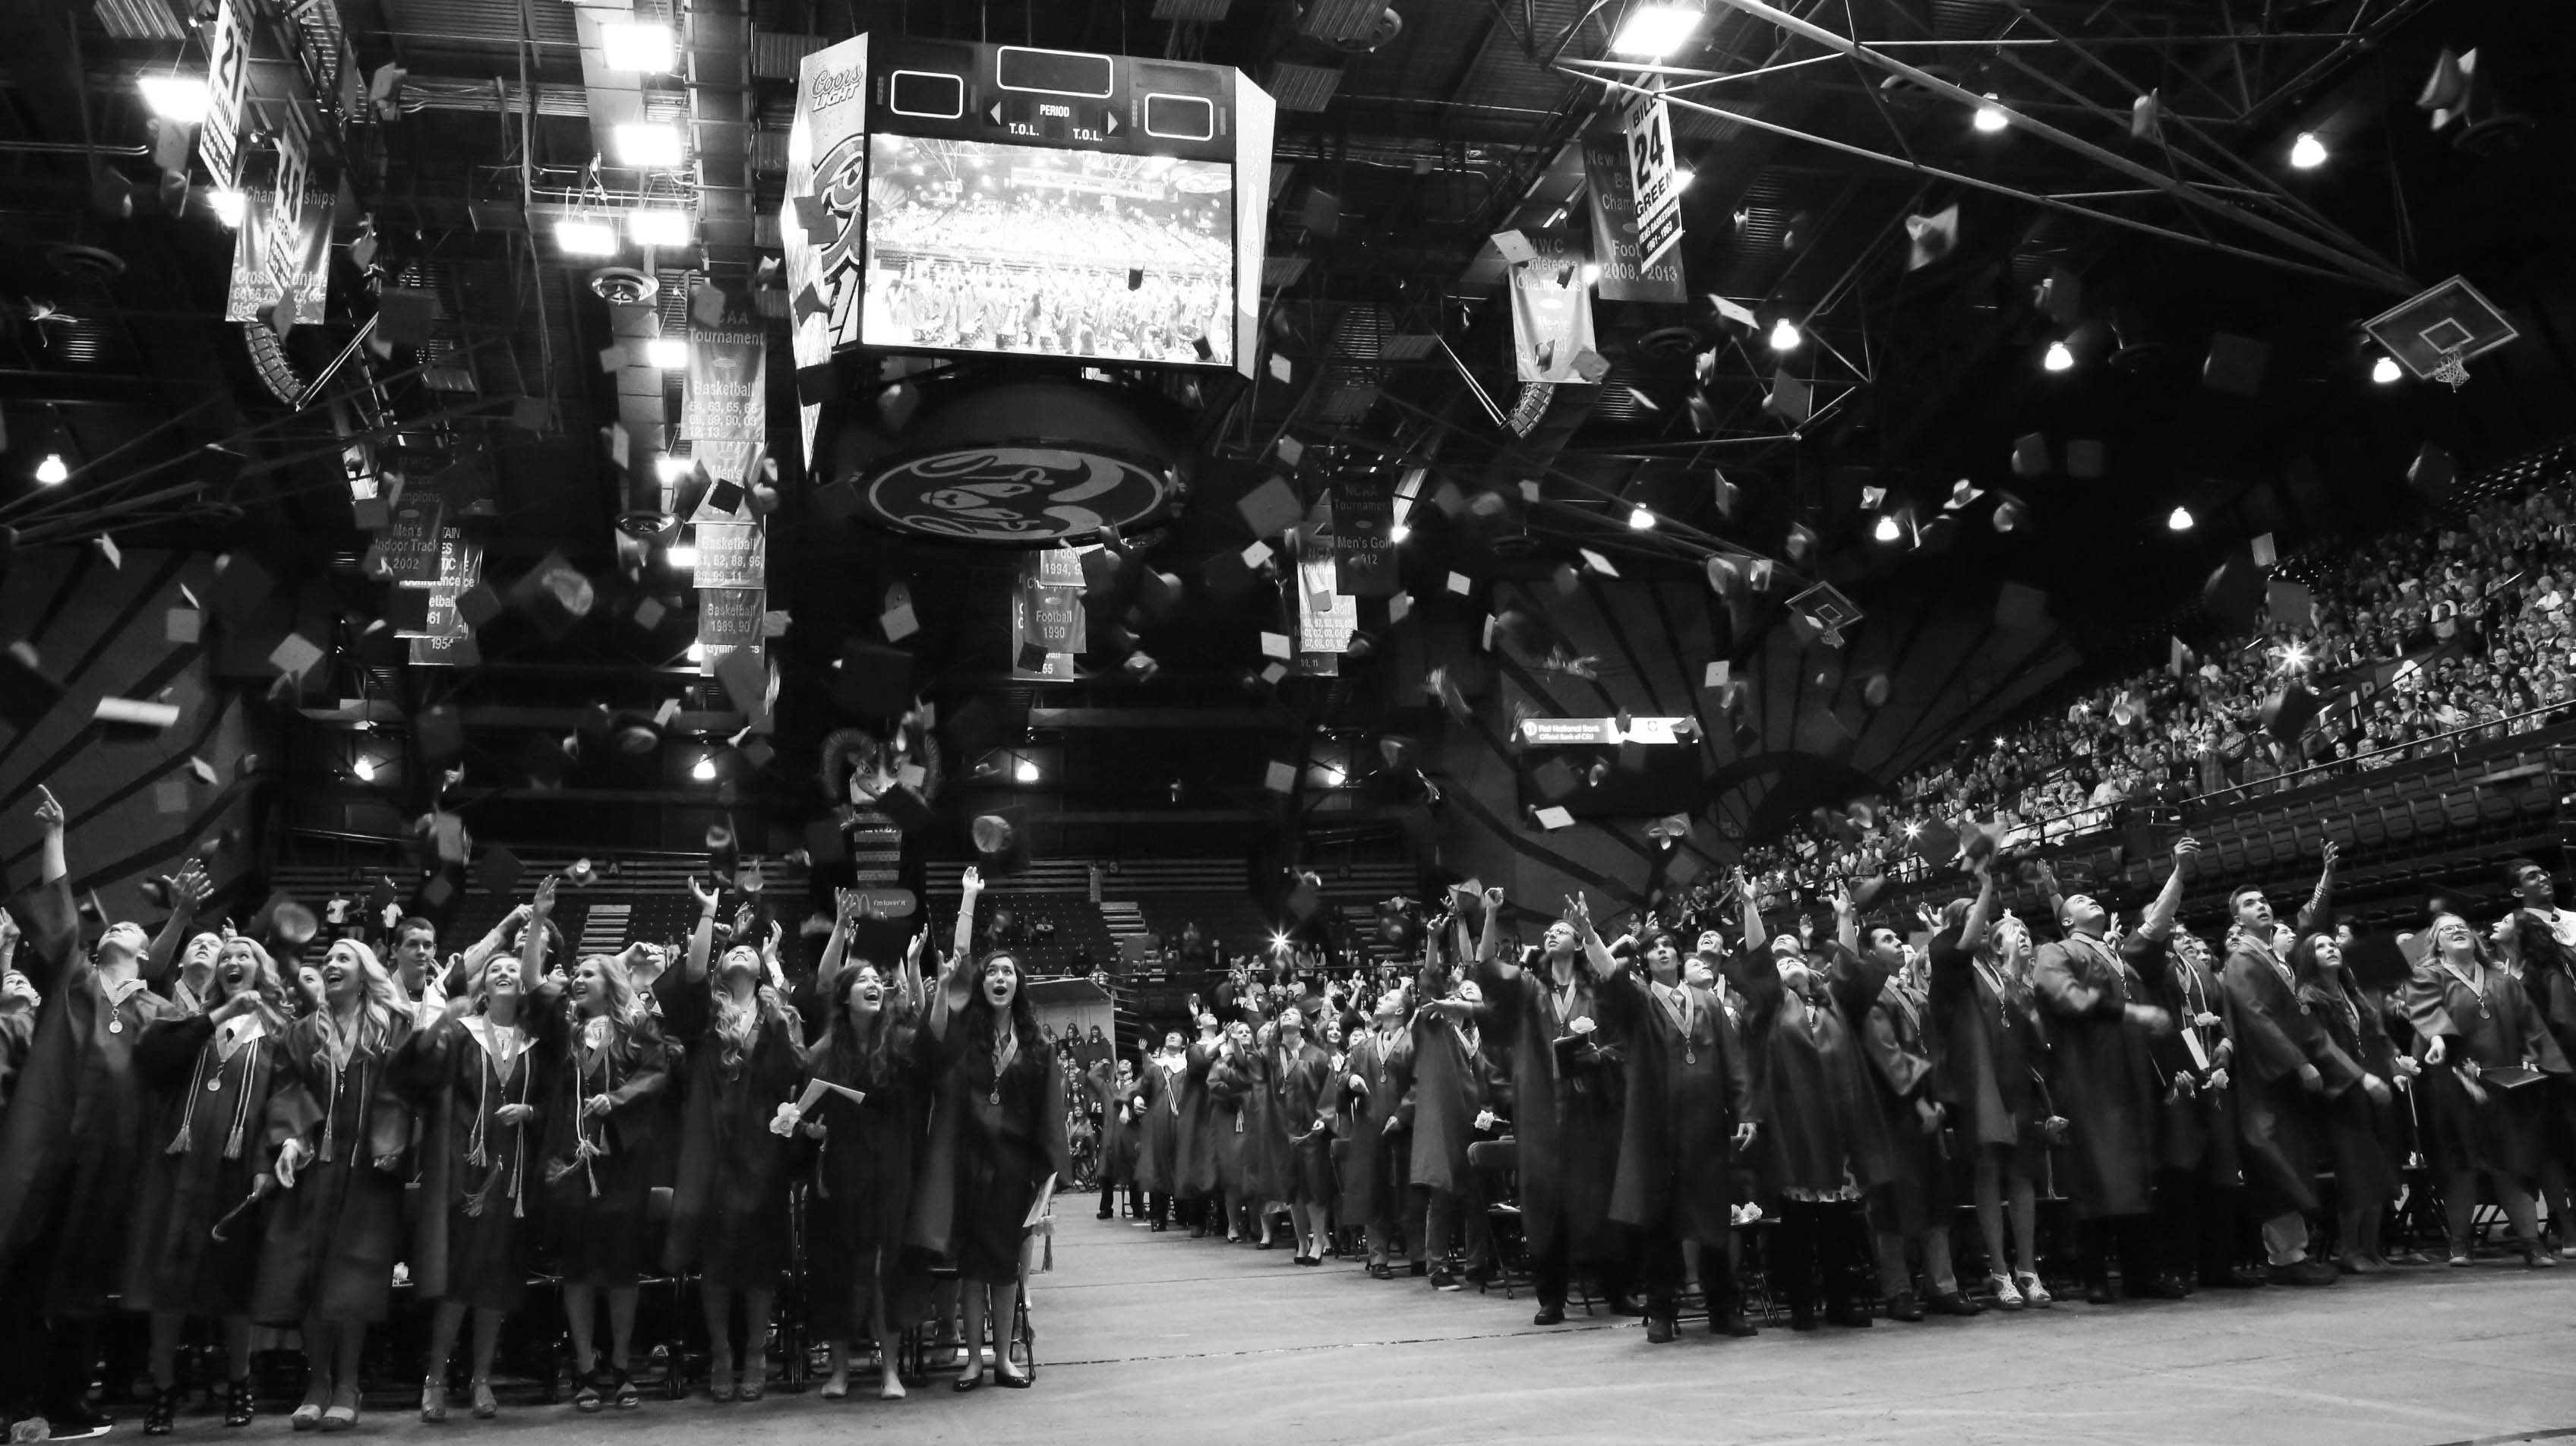 Students celebrate graduation by throwing their caps